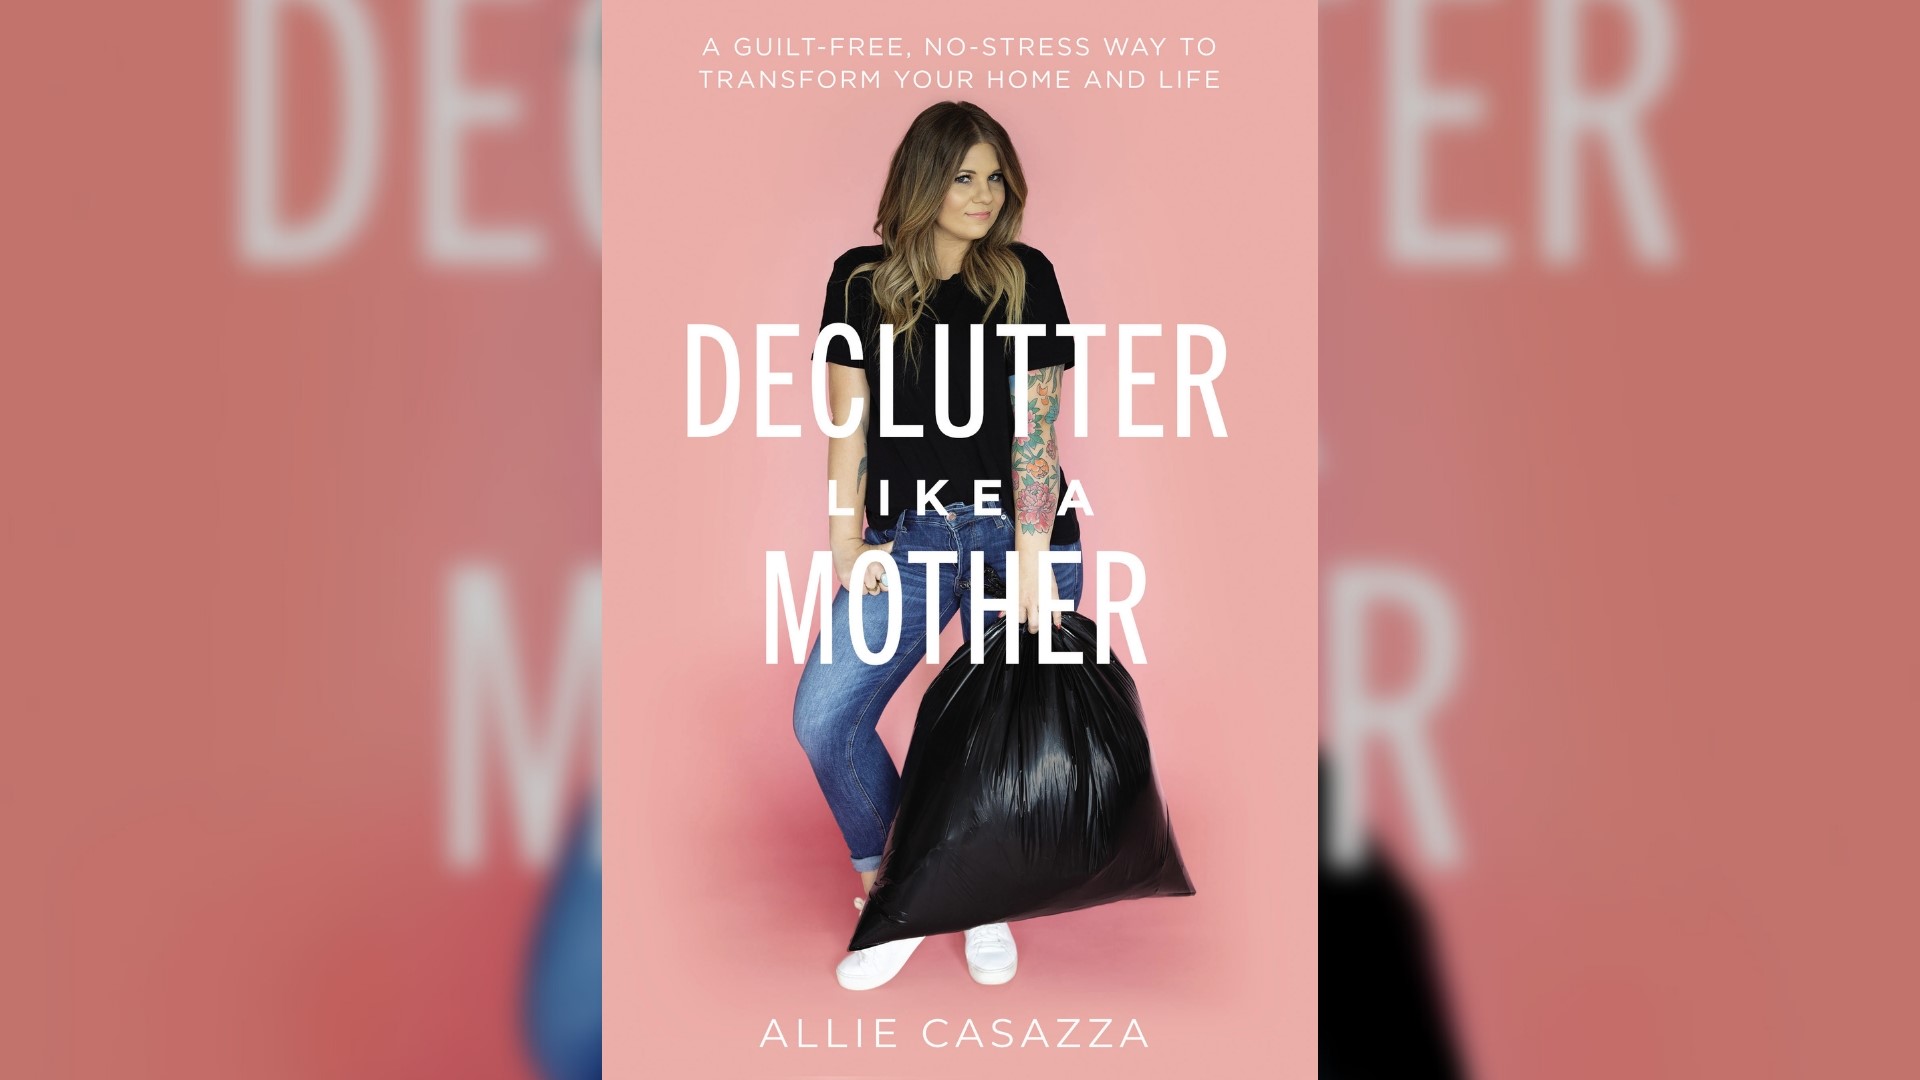 "Declutter Like A Mother" author Allie Casazza joined New Day NW to share how she went from being overwhelmed by motherhood to living simply. #newdaynw